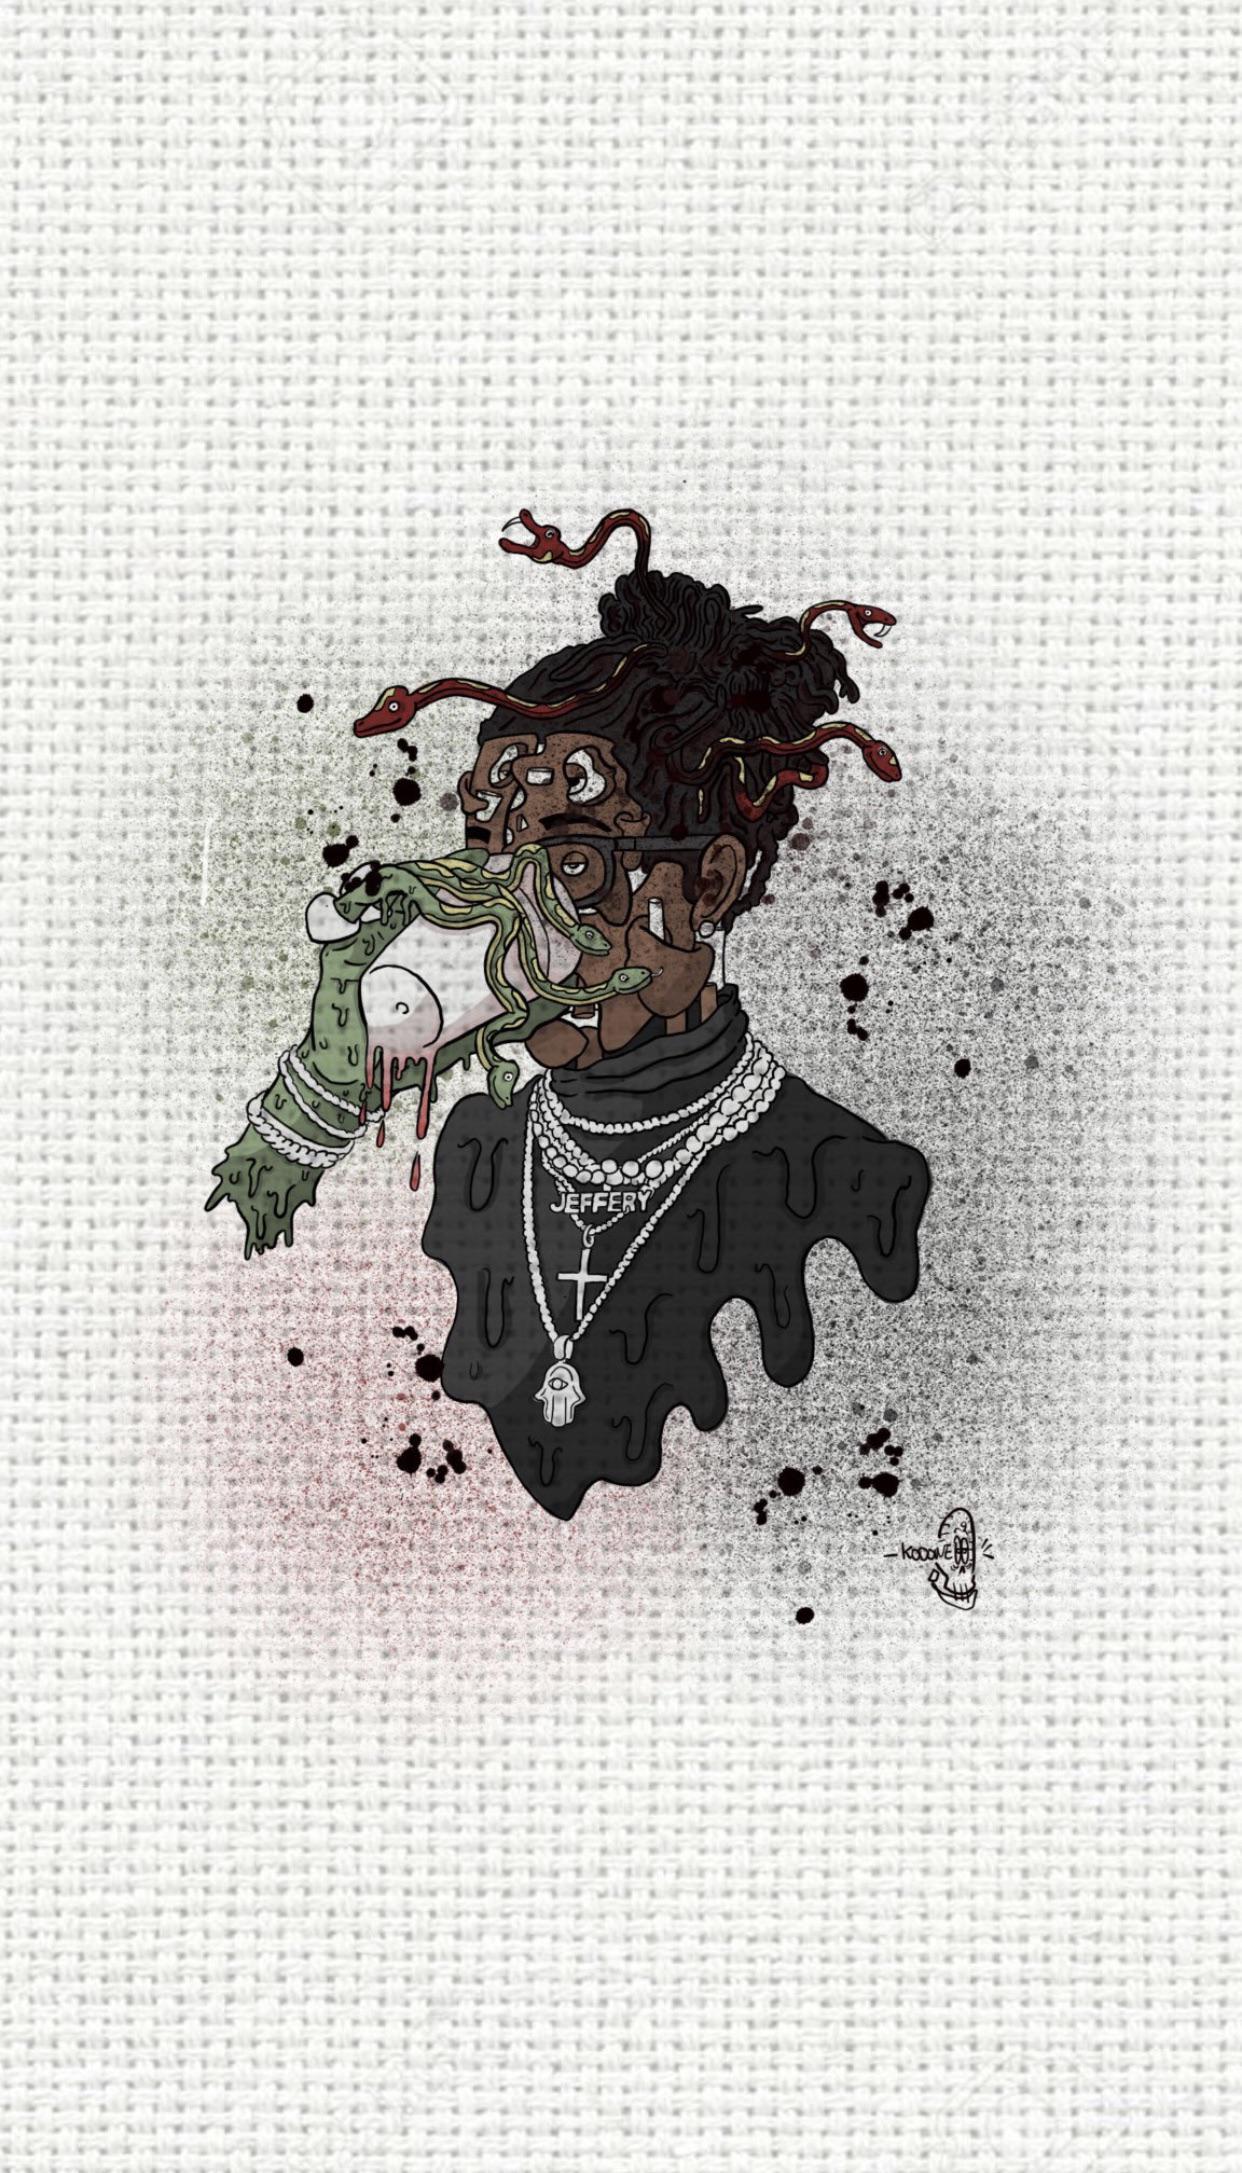 Animated Young Thug Wallpapers Top Free Animated Young Thug Backgrounds Wallpaperaccess Thexvid.com/video/bq0mxqxmlsk/video.html video fragments were taken from her. animated young thug wallpapers top